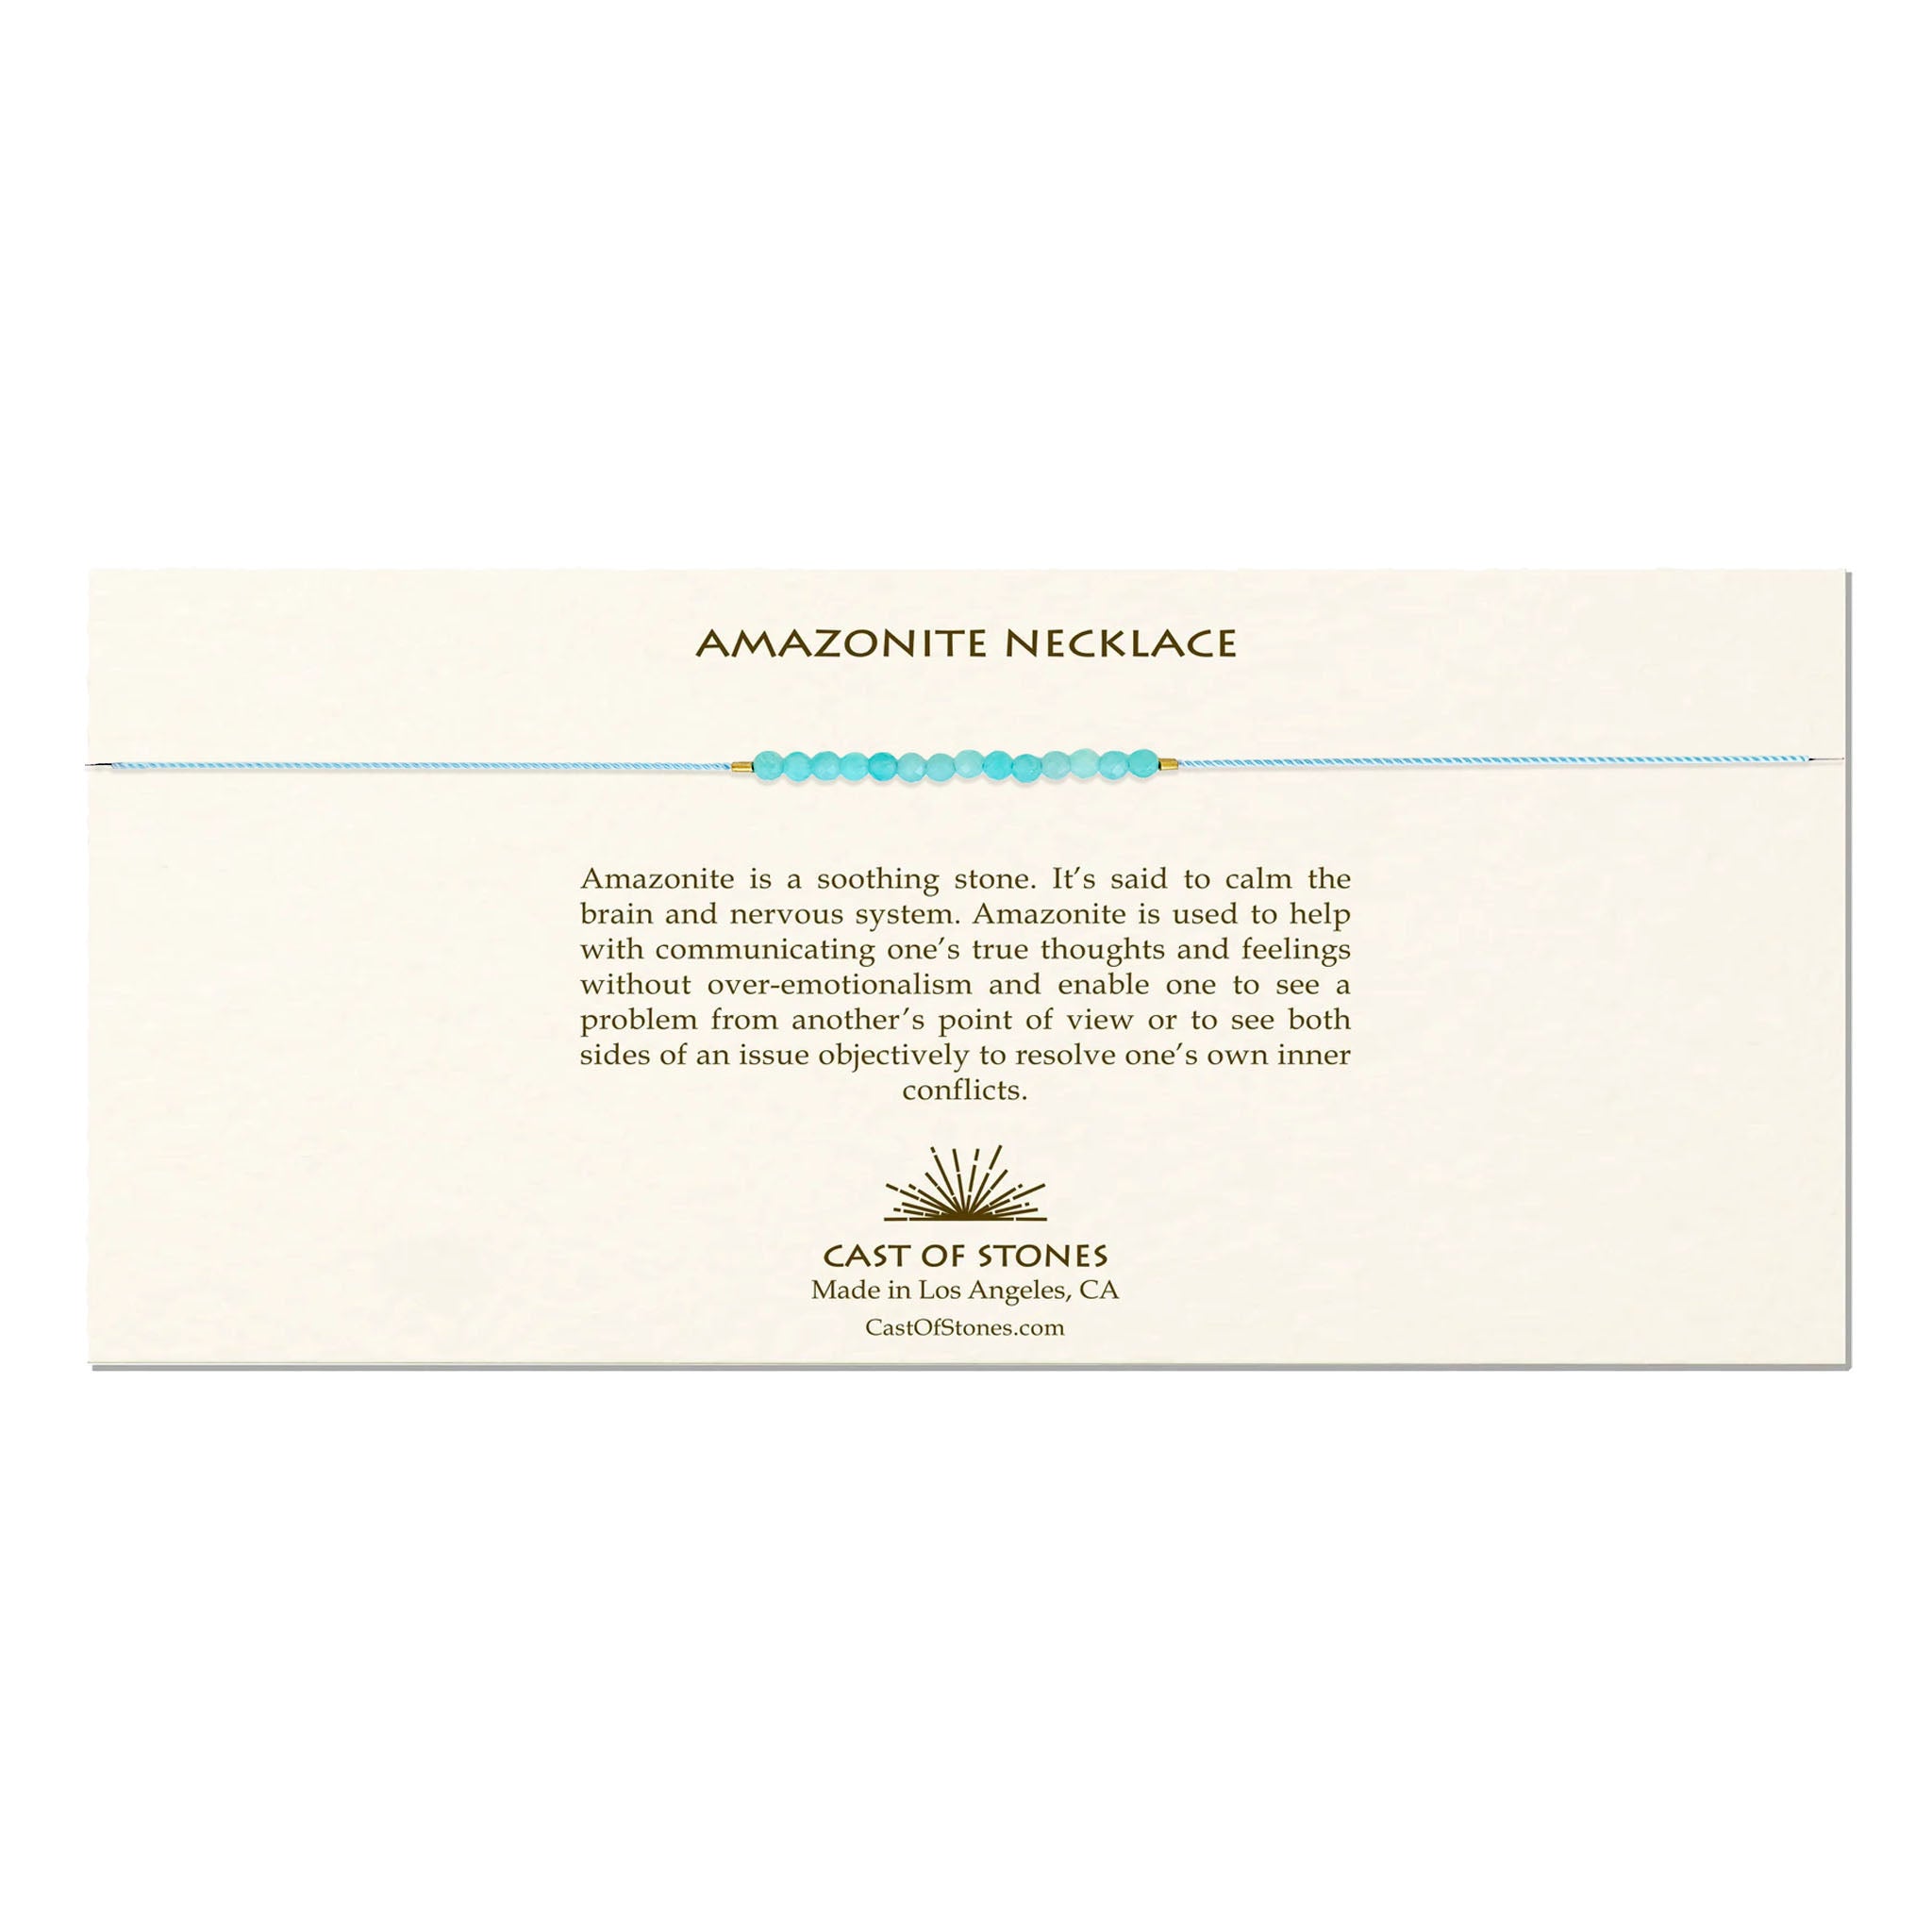 Cast-of-Stones-Amazonite-Gemstone-Necklace-with-Information-Card